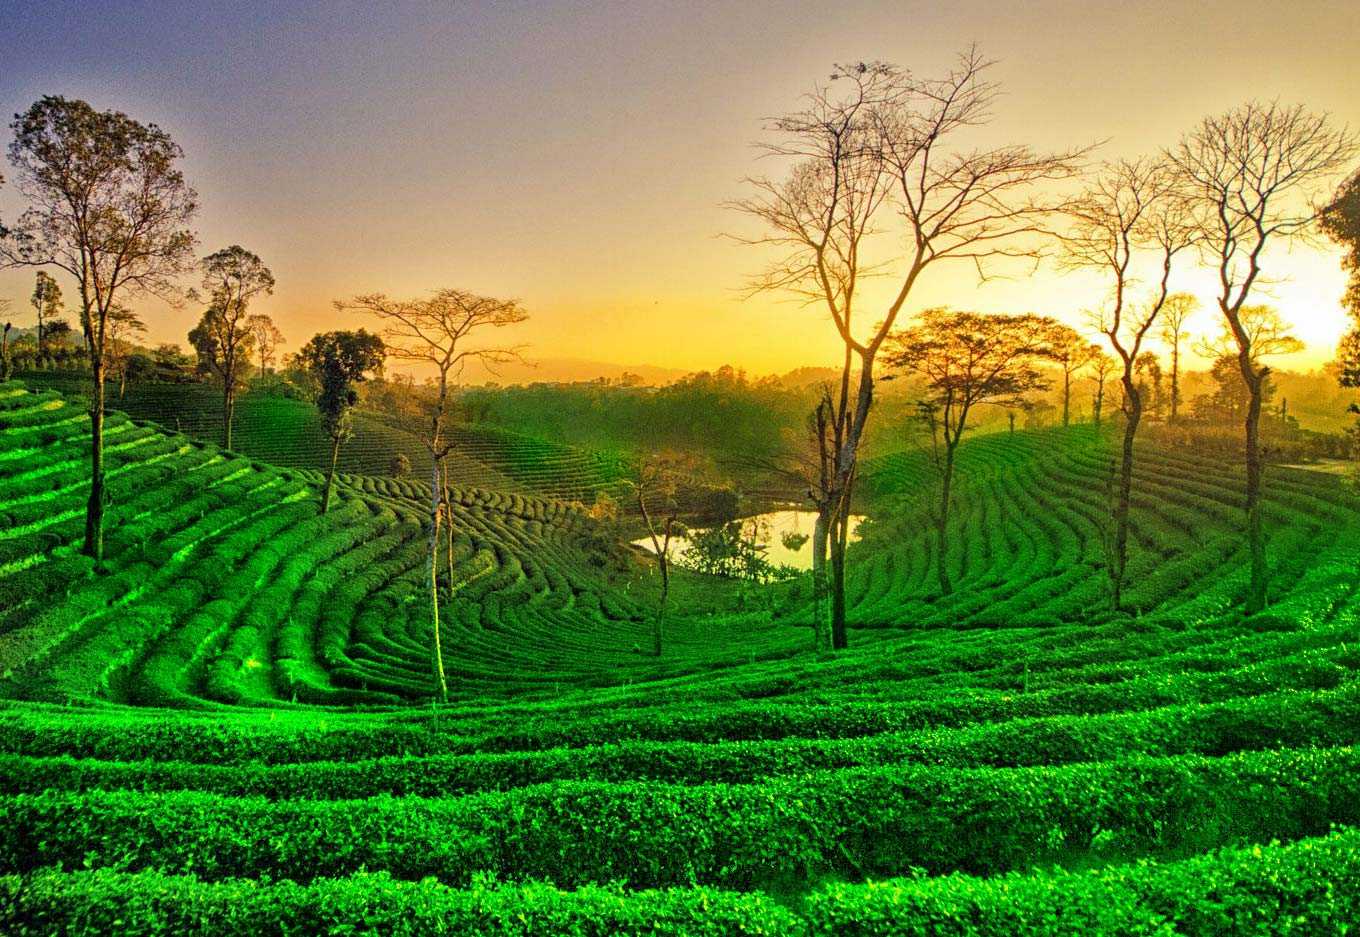 Assam Tour Package: Explore the Beauty of Northeast India